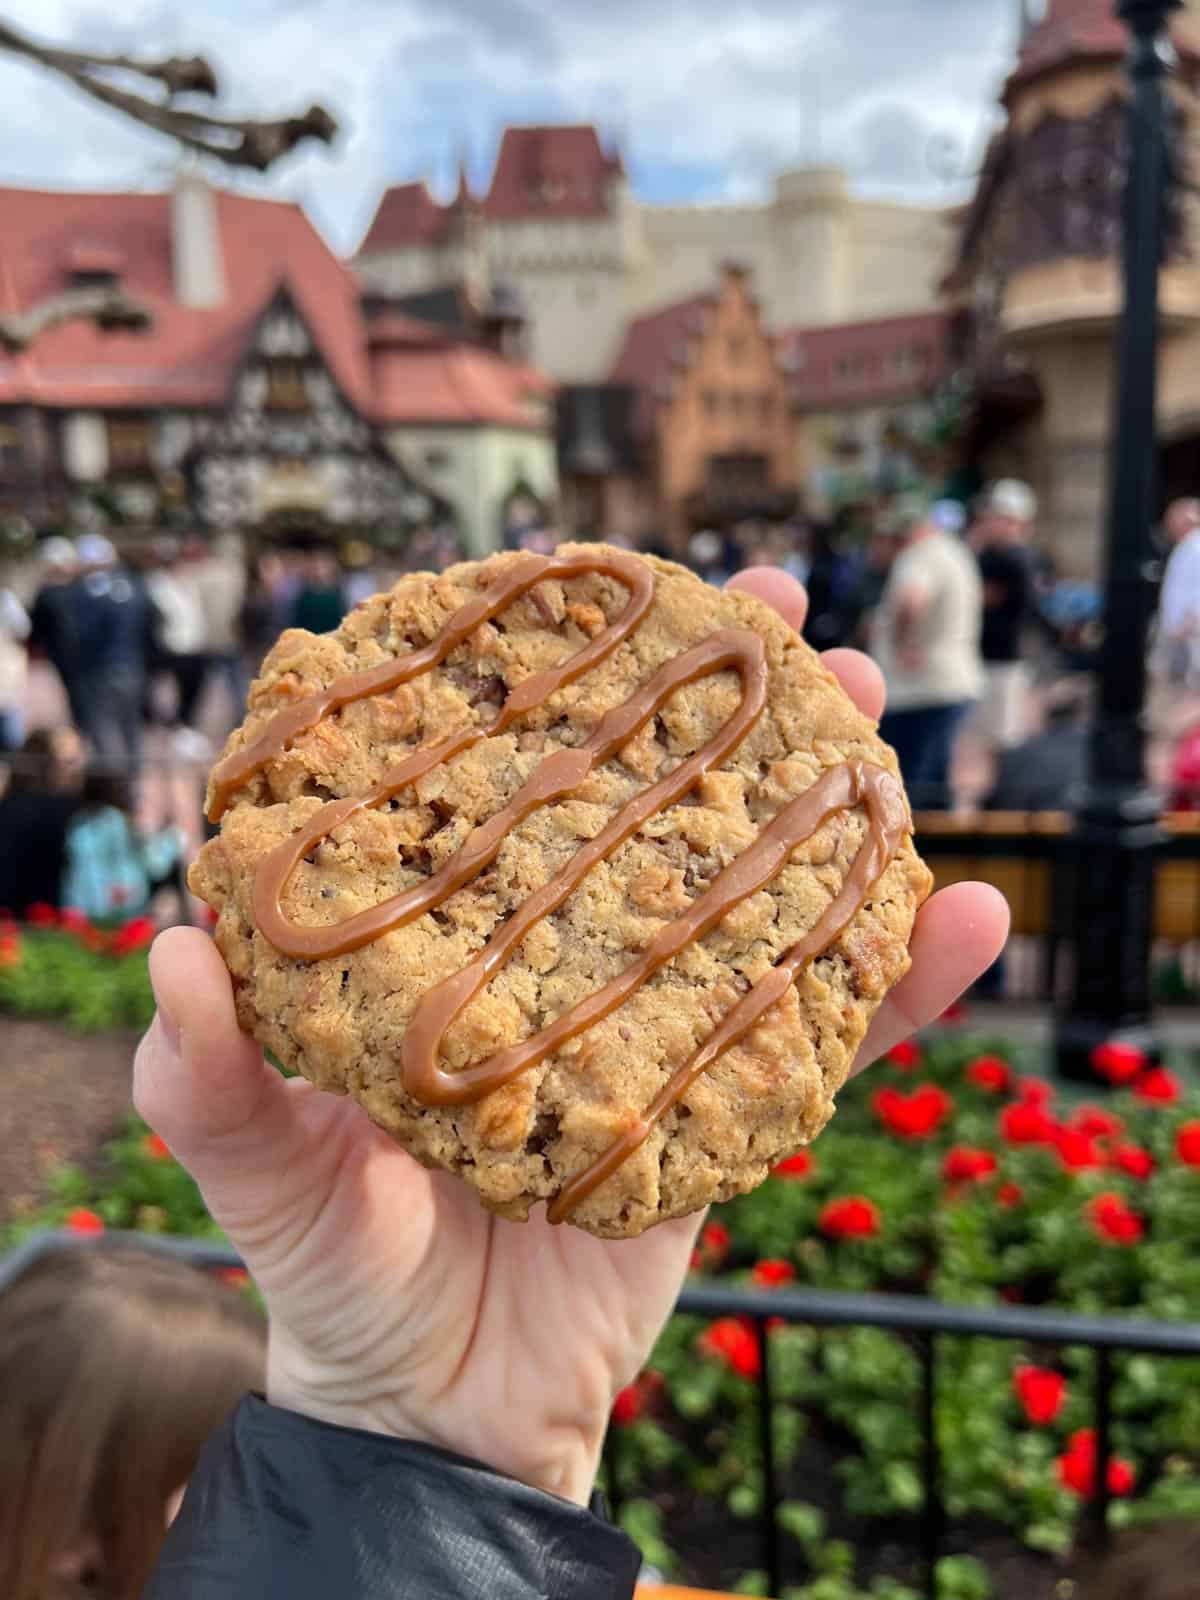 Caramel apple oatmeal cookie from Epcot.